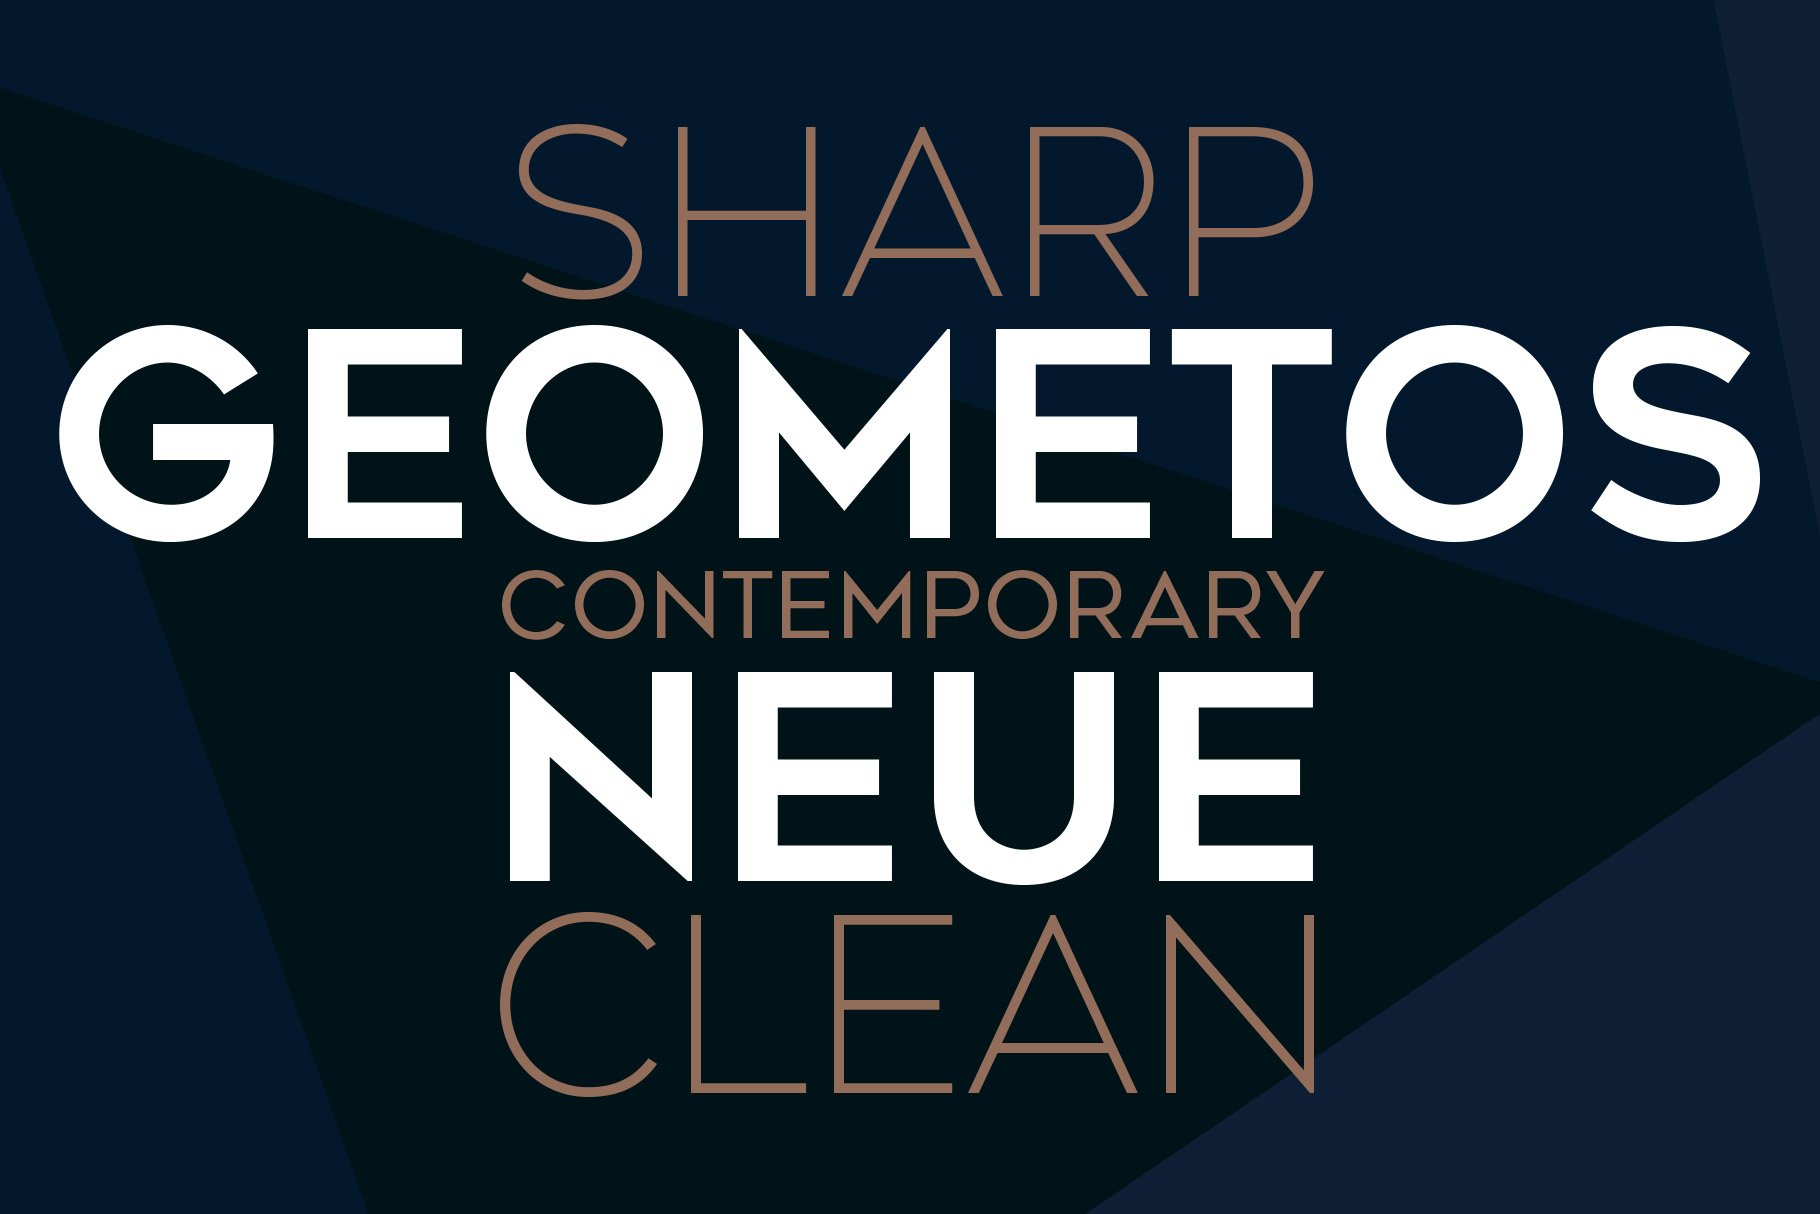 Geometos Neue Font Family cover image.